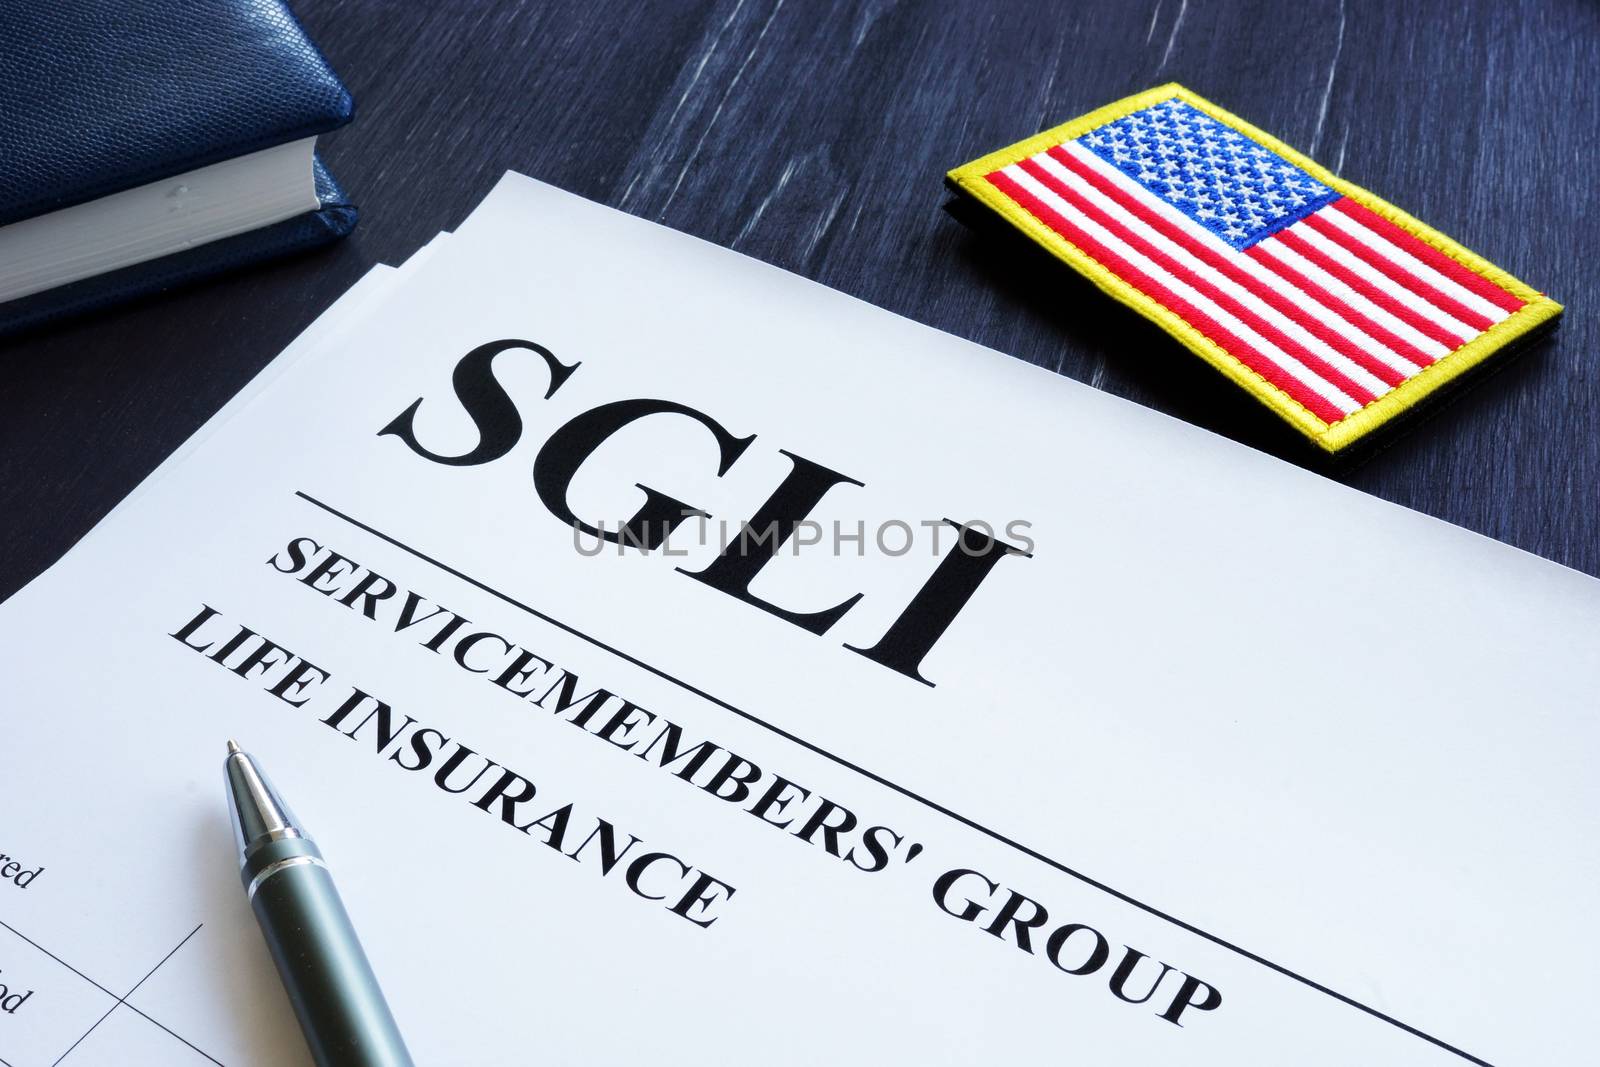 Servicemembers Group Life Insurance SGLI policy and pen. by designer491